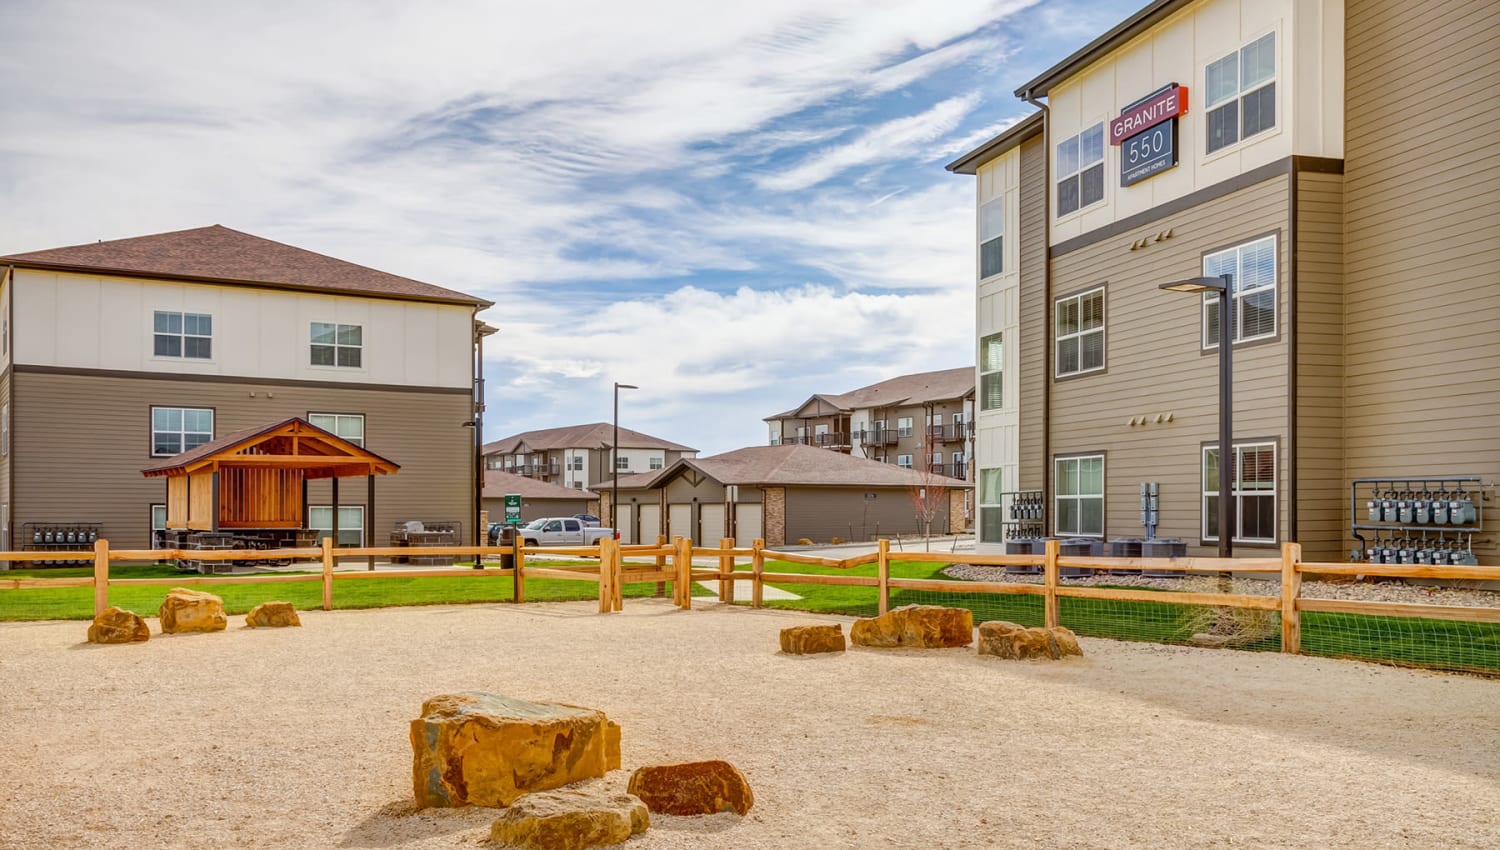 Well-managed landscaping outside resident buildings at Granite 550 in Casper, Wyoming